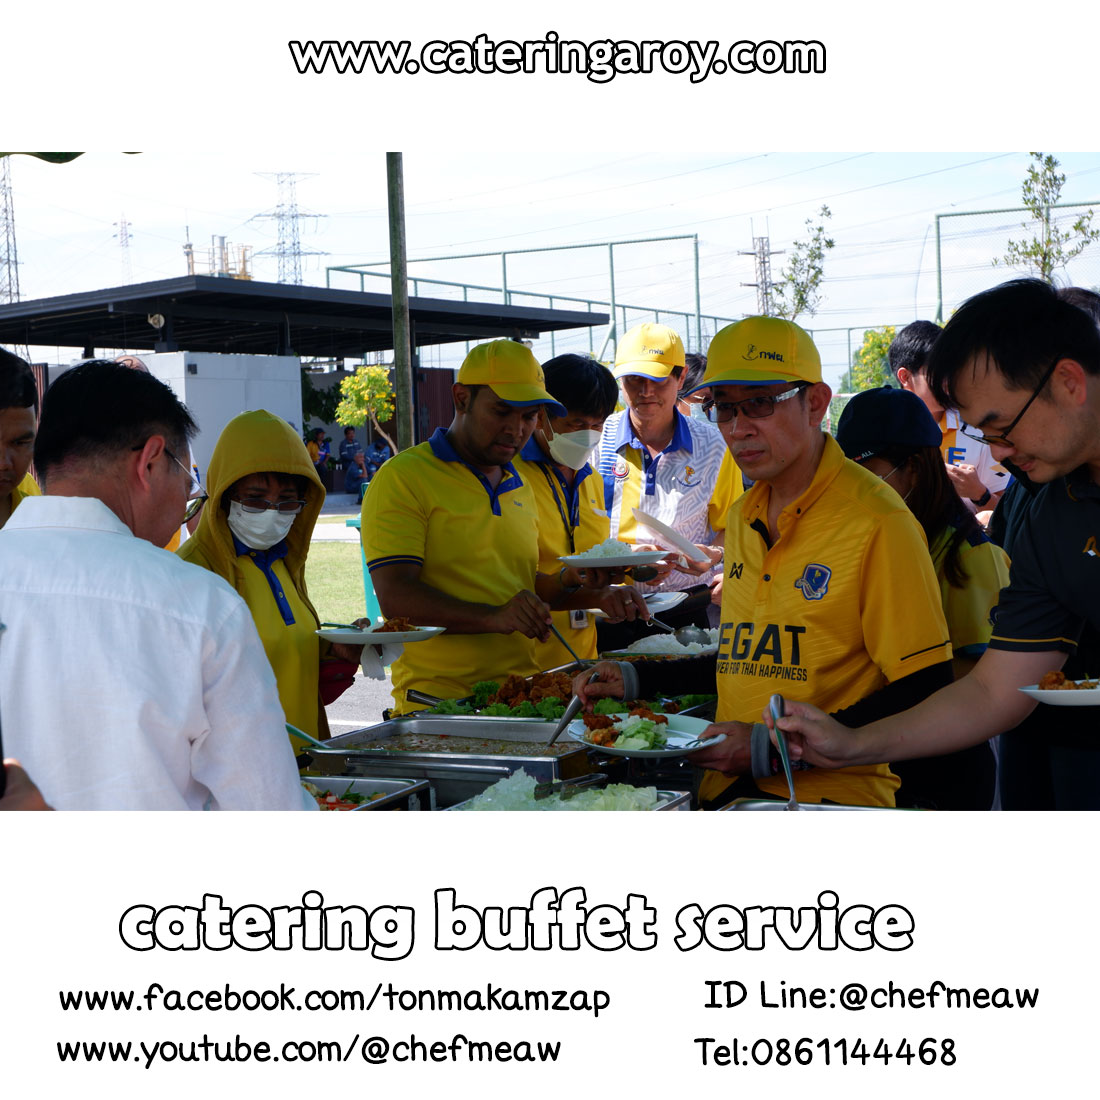 catering-buffet-service-1